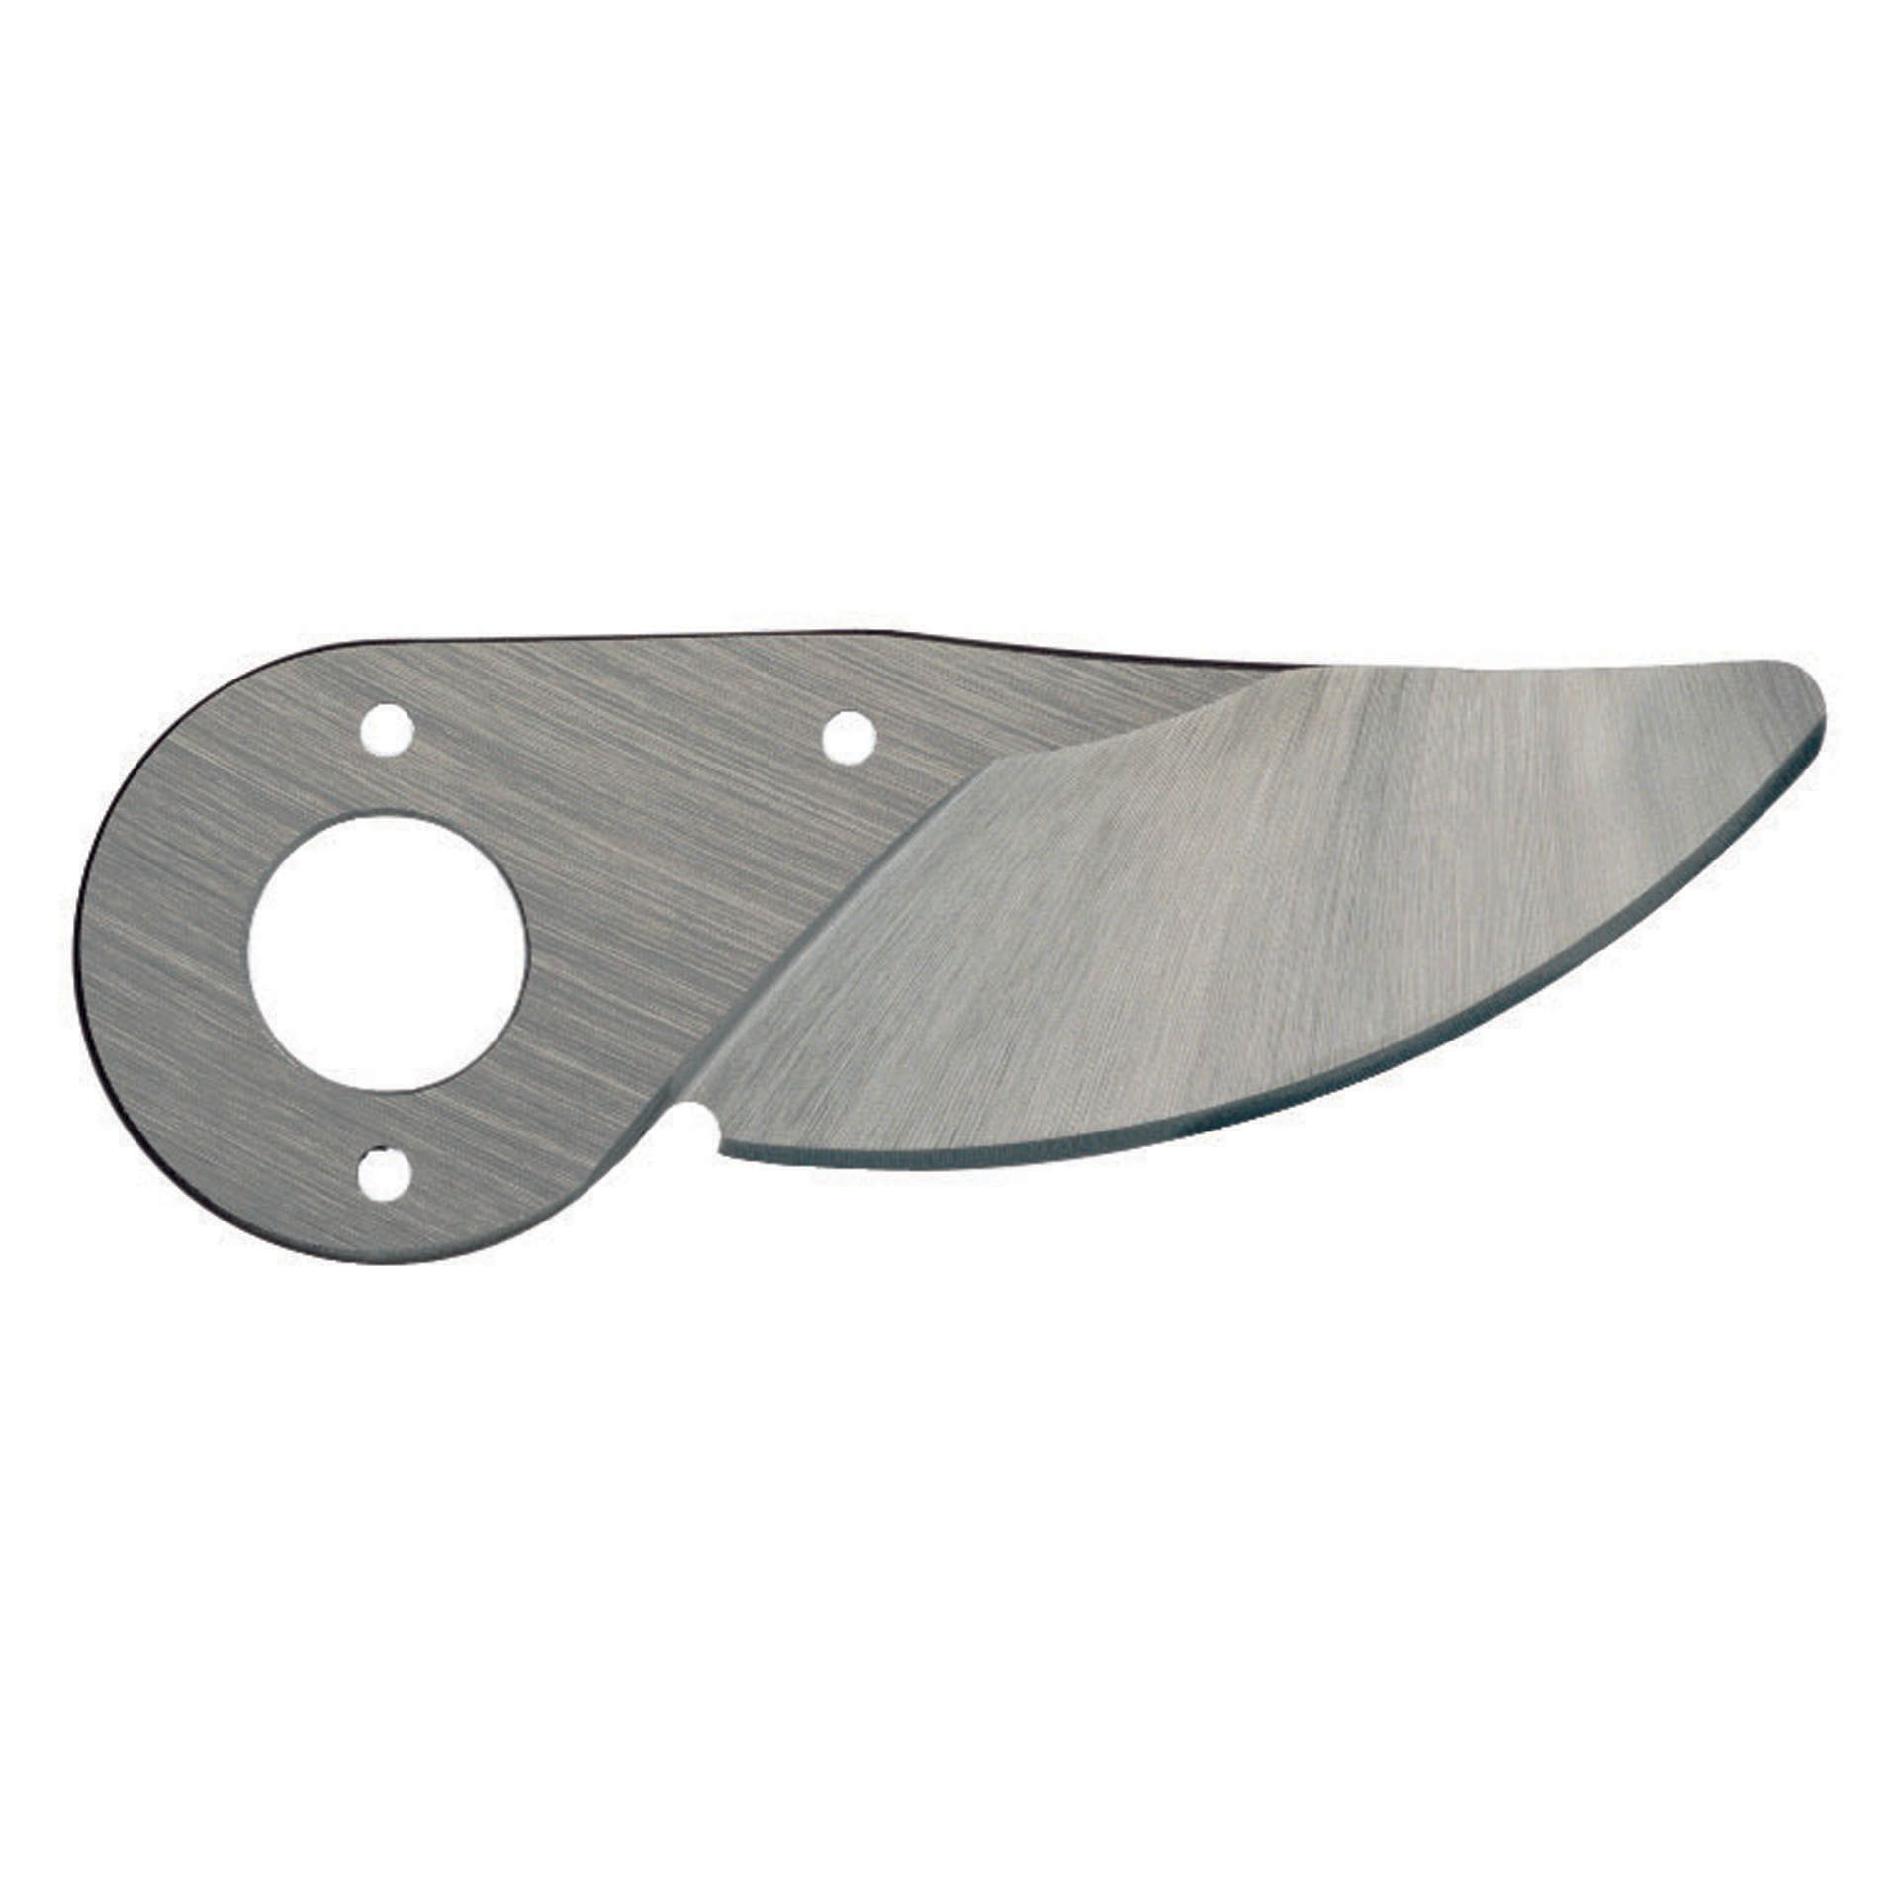 FEL73 Felco Replacement Blade for F-3 Pruning Shear